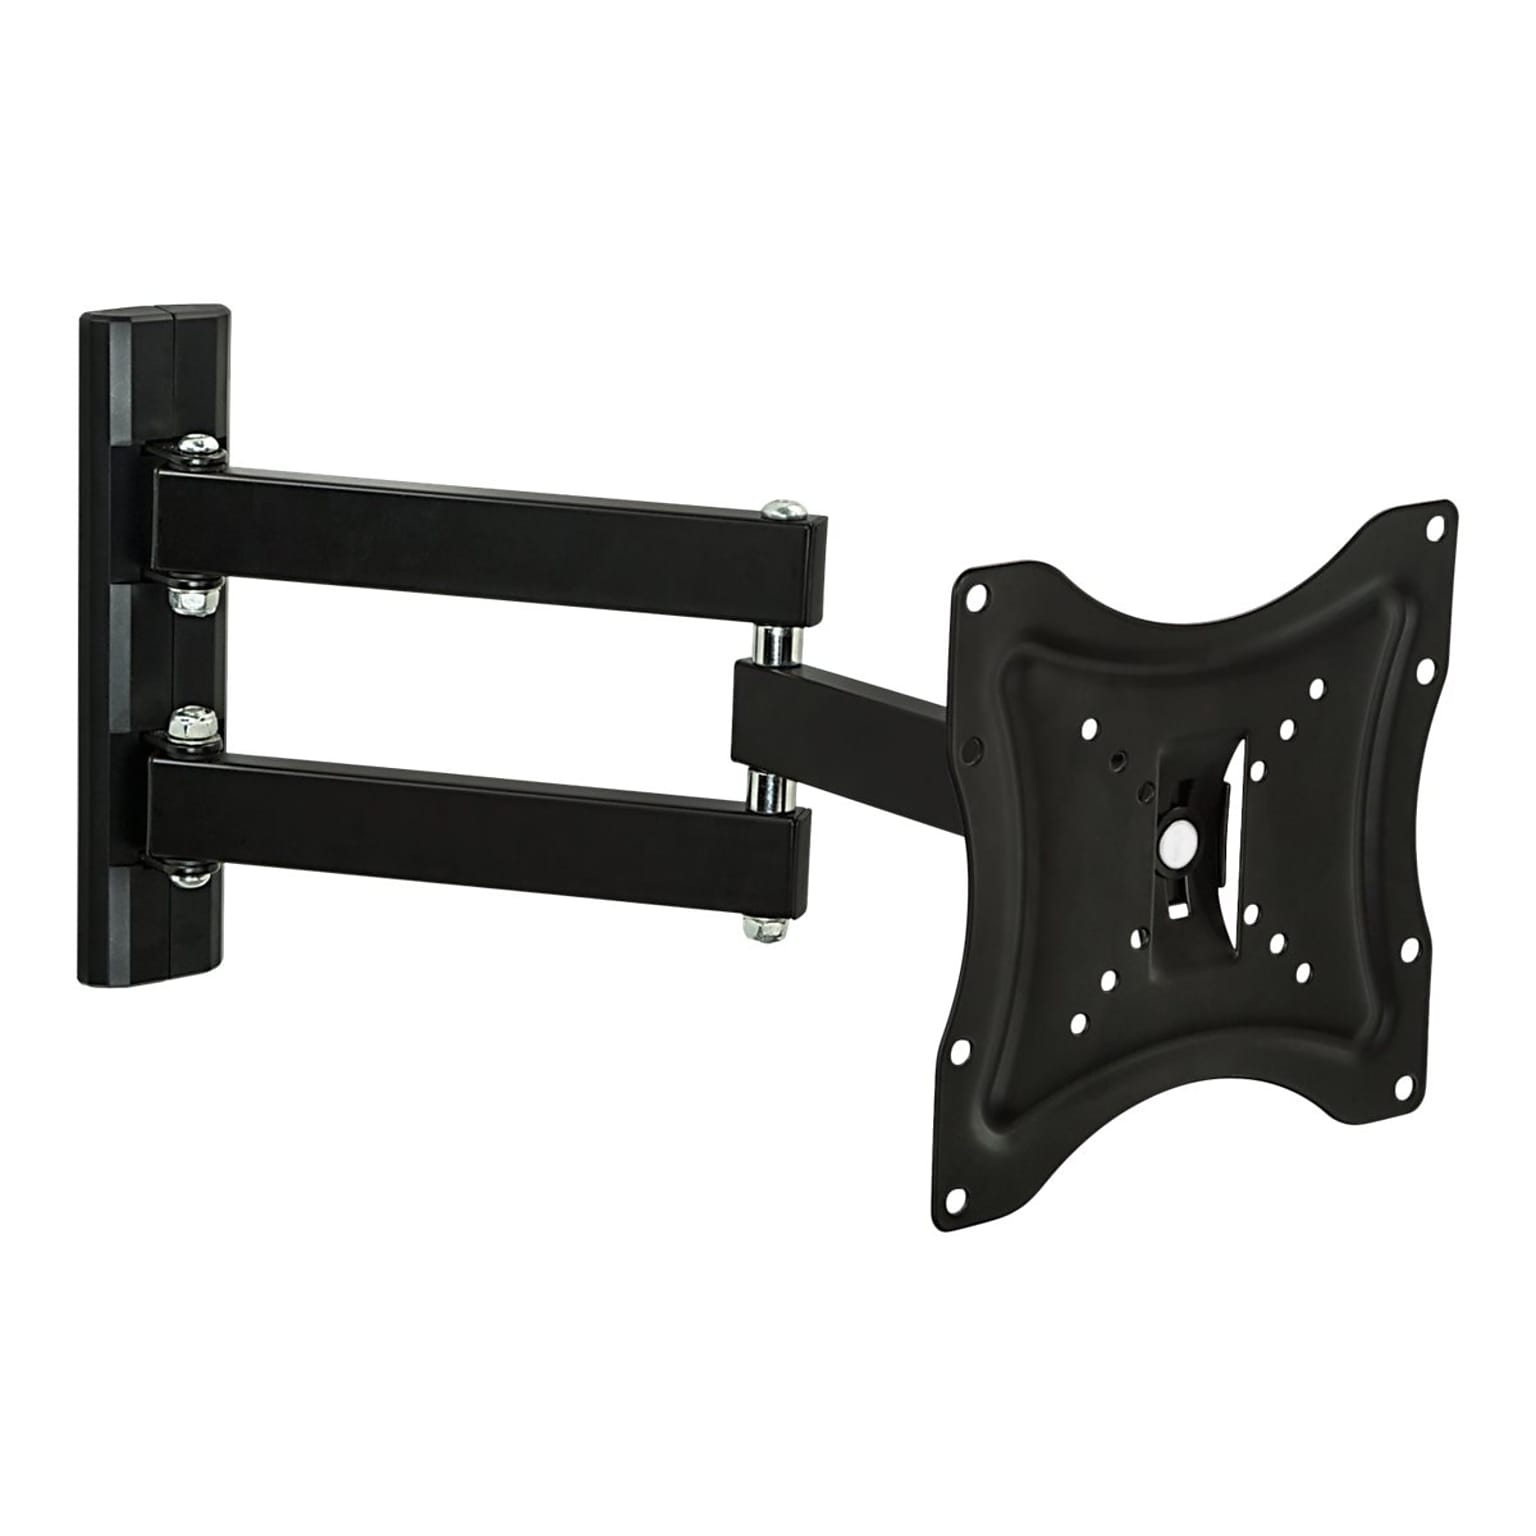 Mount-It! Articulating Wall TV Mount for 23 - 42 Screens, 66 lbs. Max. (MI-2041L)